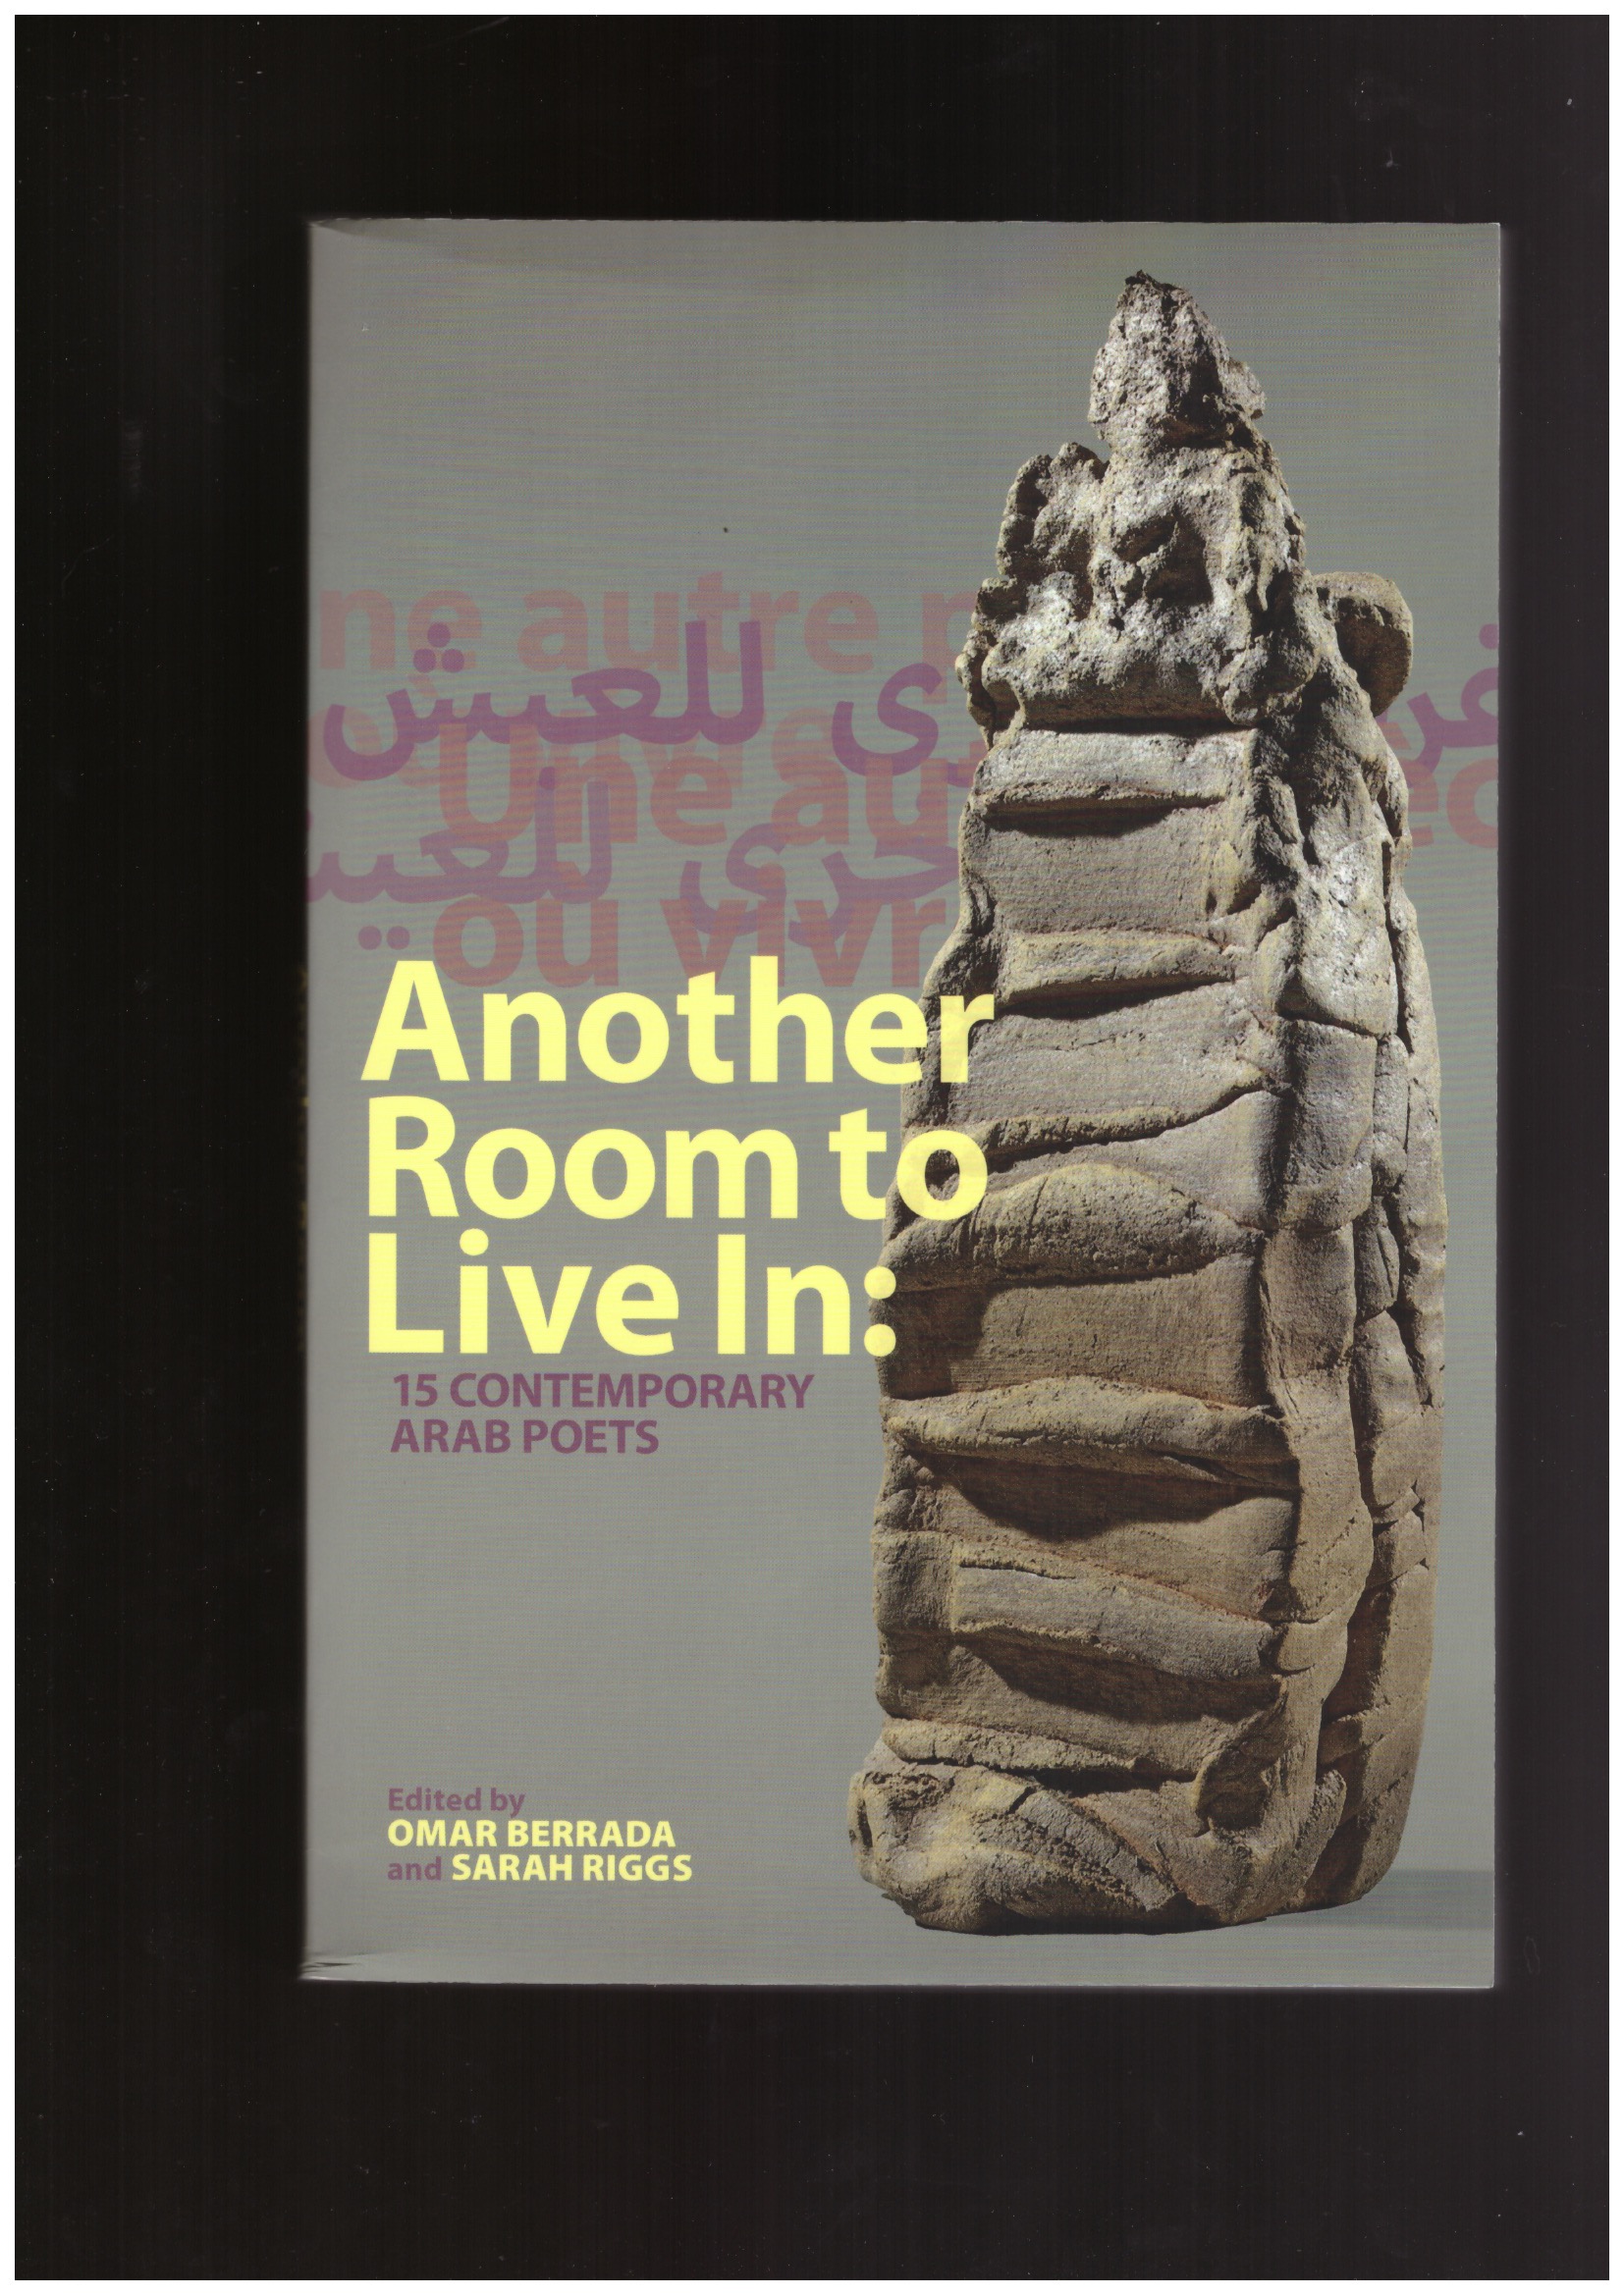 BERRADA, Omar; RIGGS, Sarah (eds.) - Another Room to Live In: 15 Contemporary Arab Poets